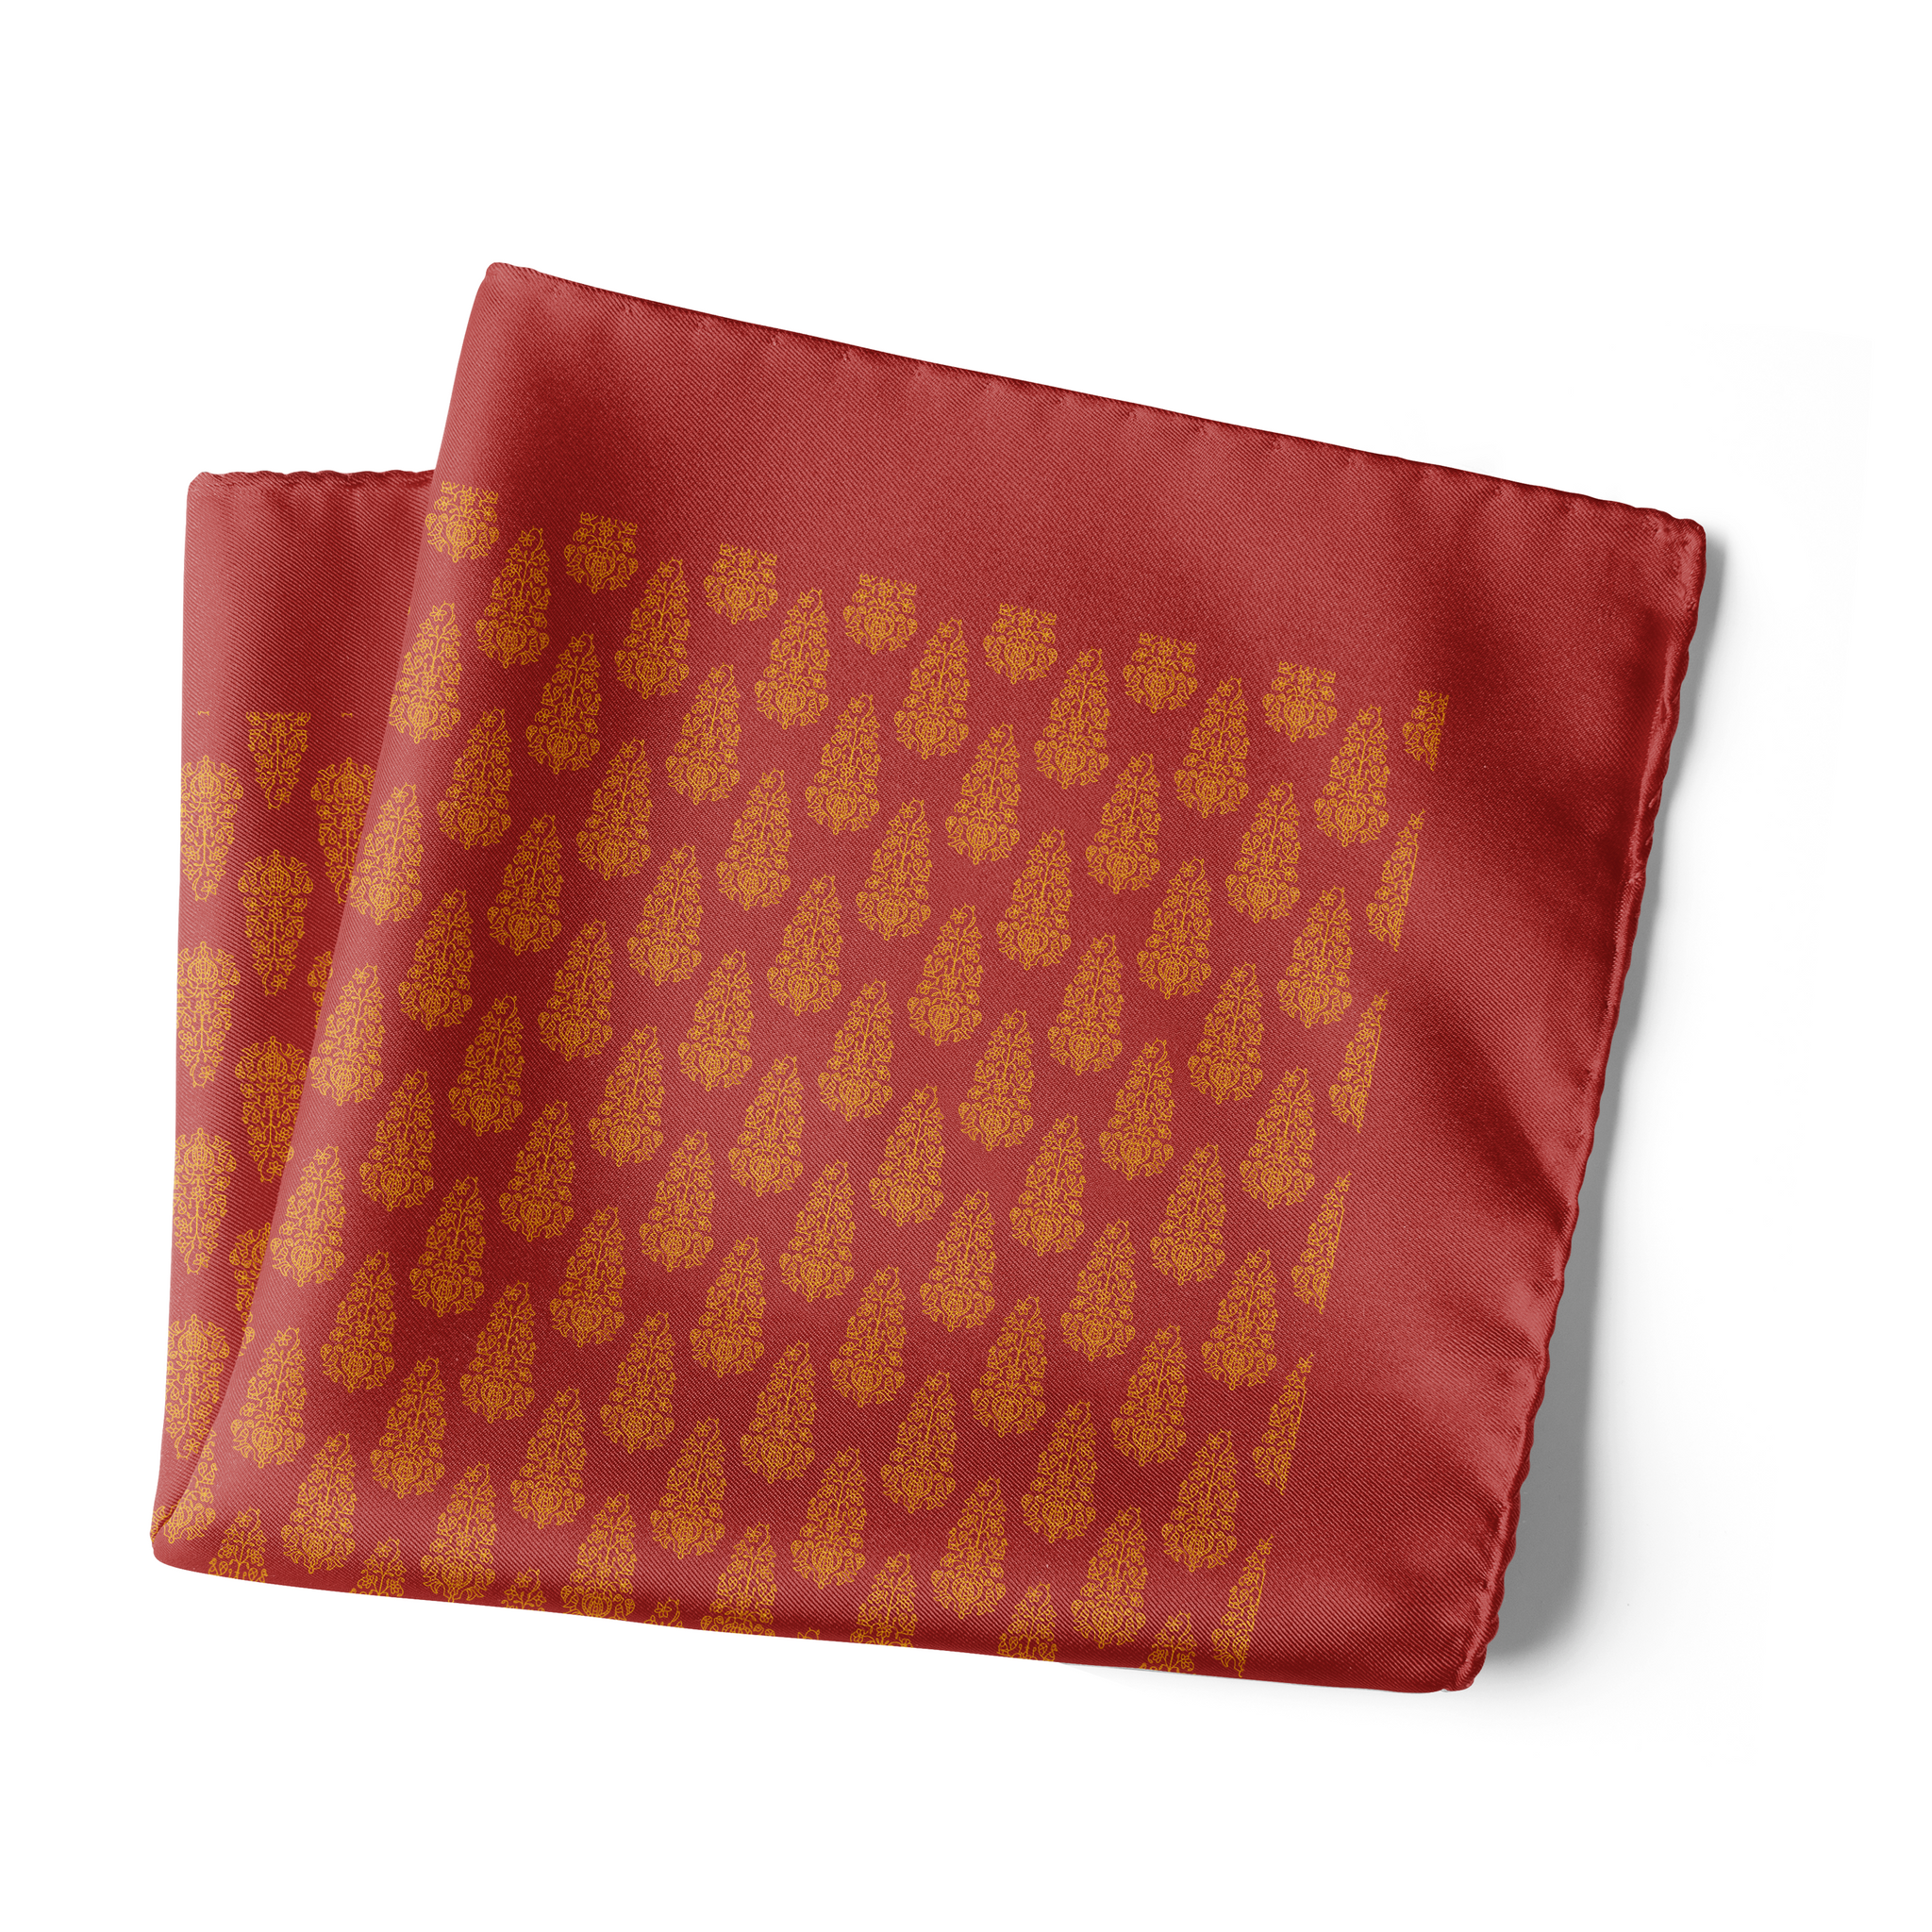 Chokore Red Silk Pocket Square - Indian At Heart line